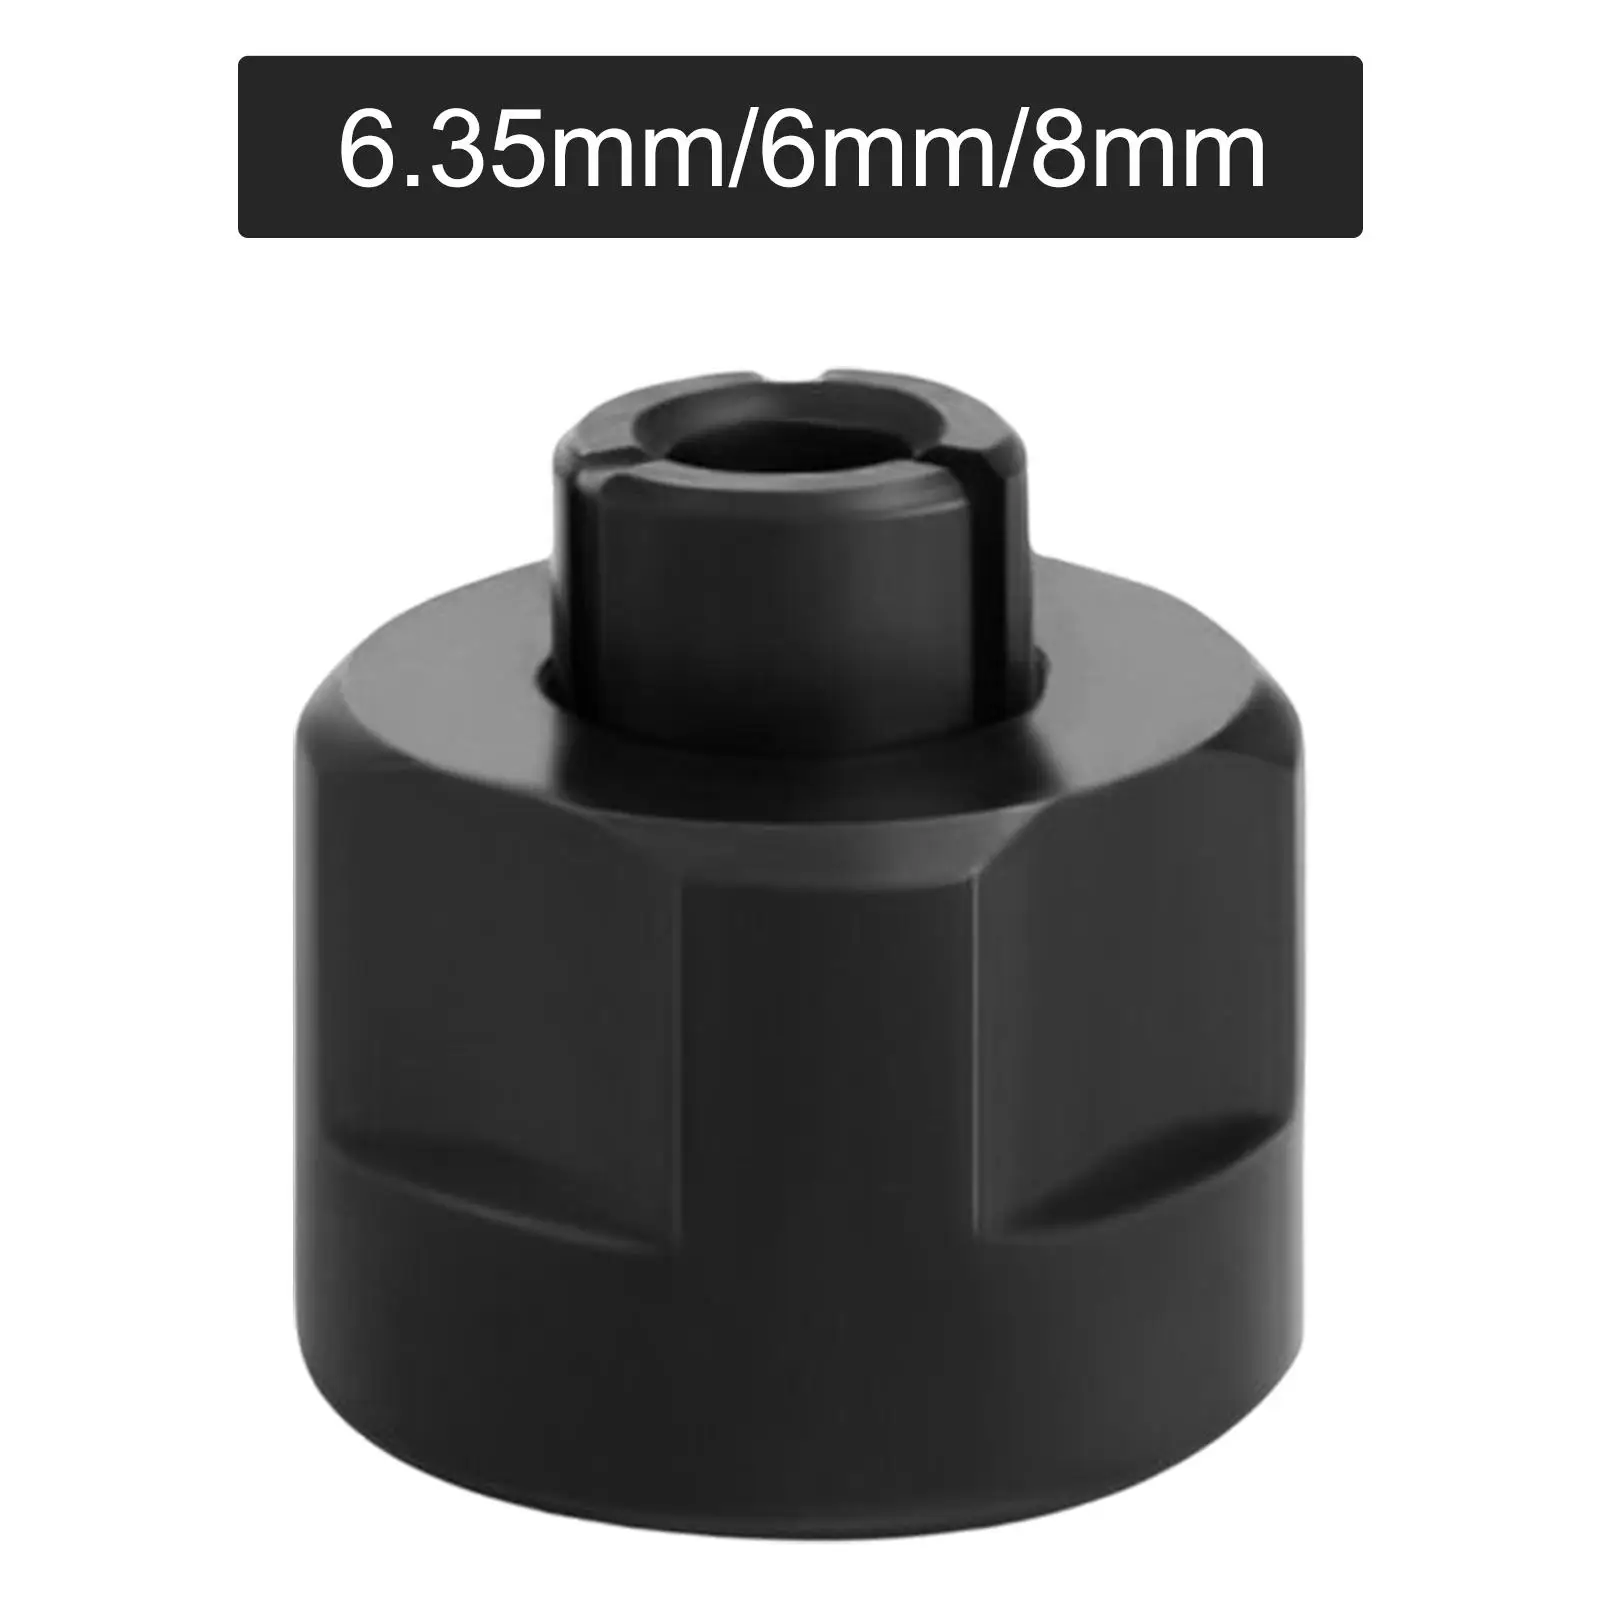 Router Collet Chuck Reduction Sleeve Collet Reduction Shank High Precision Nut Cutting Adapter for Engraving Machine Woodworking